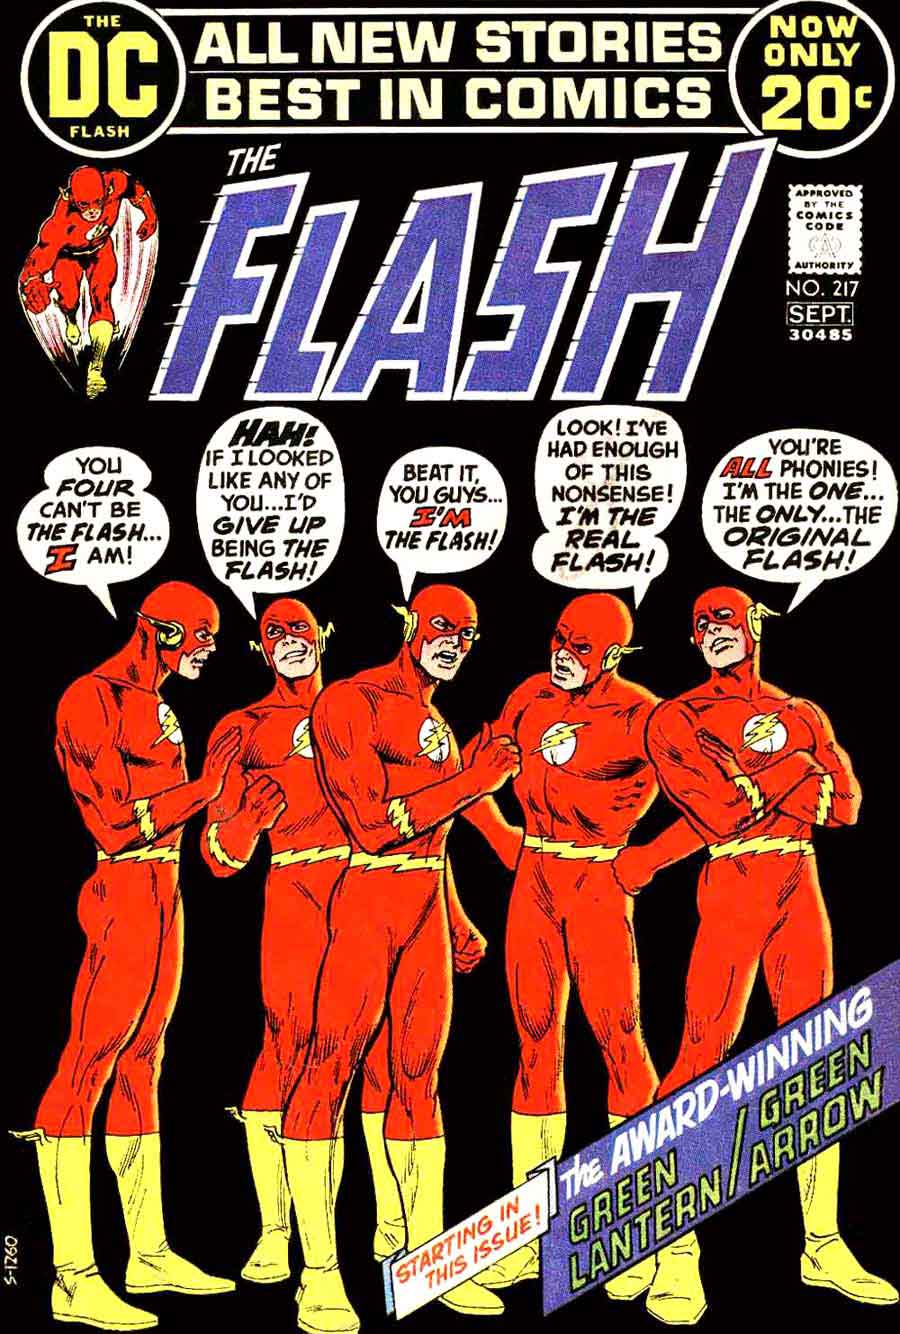 The Flash #217 cover